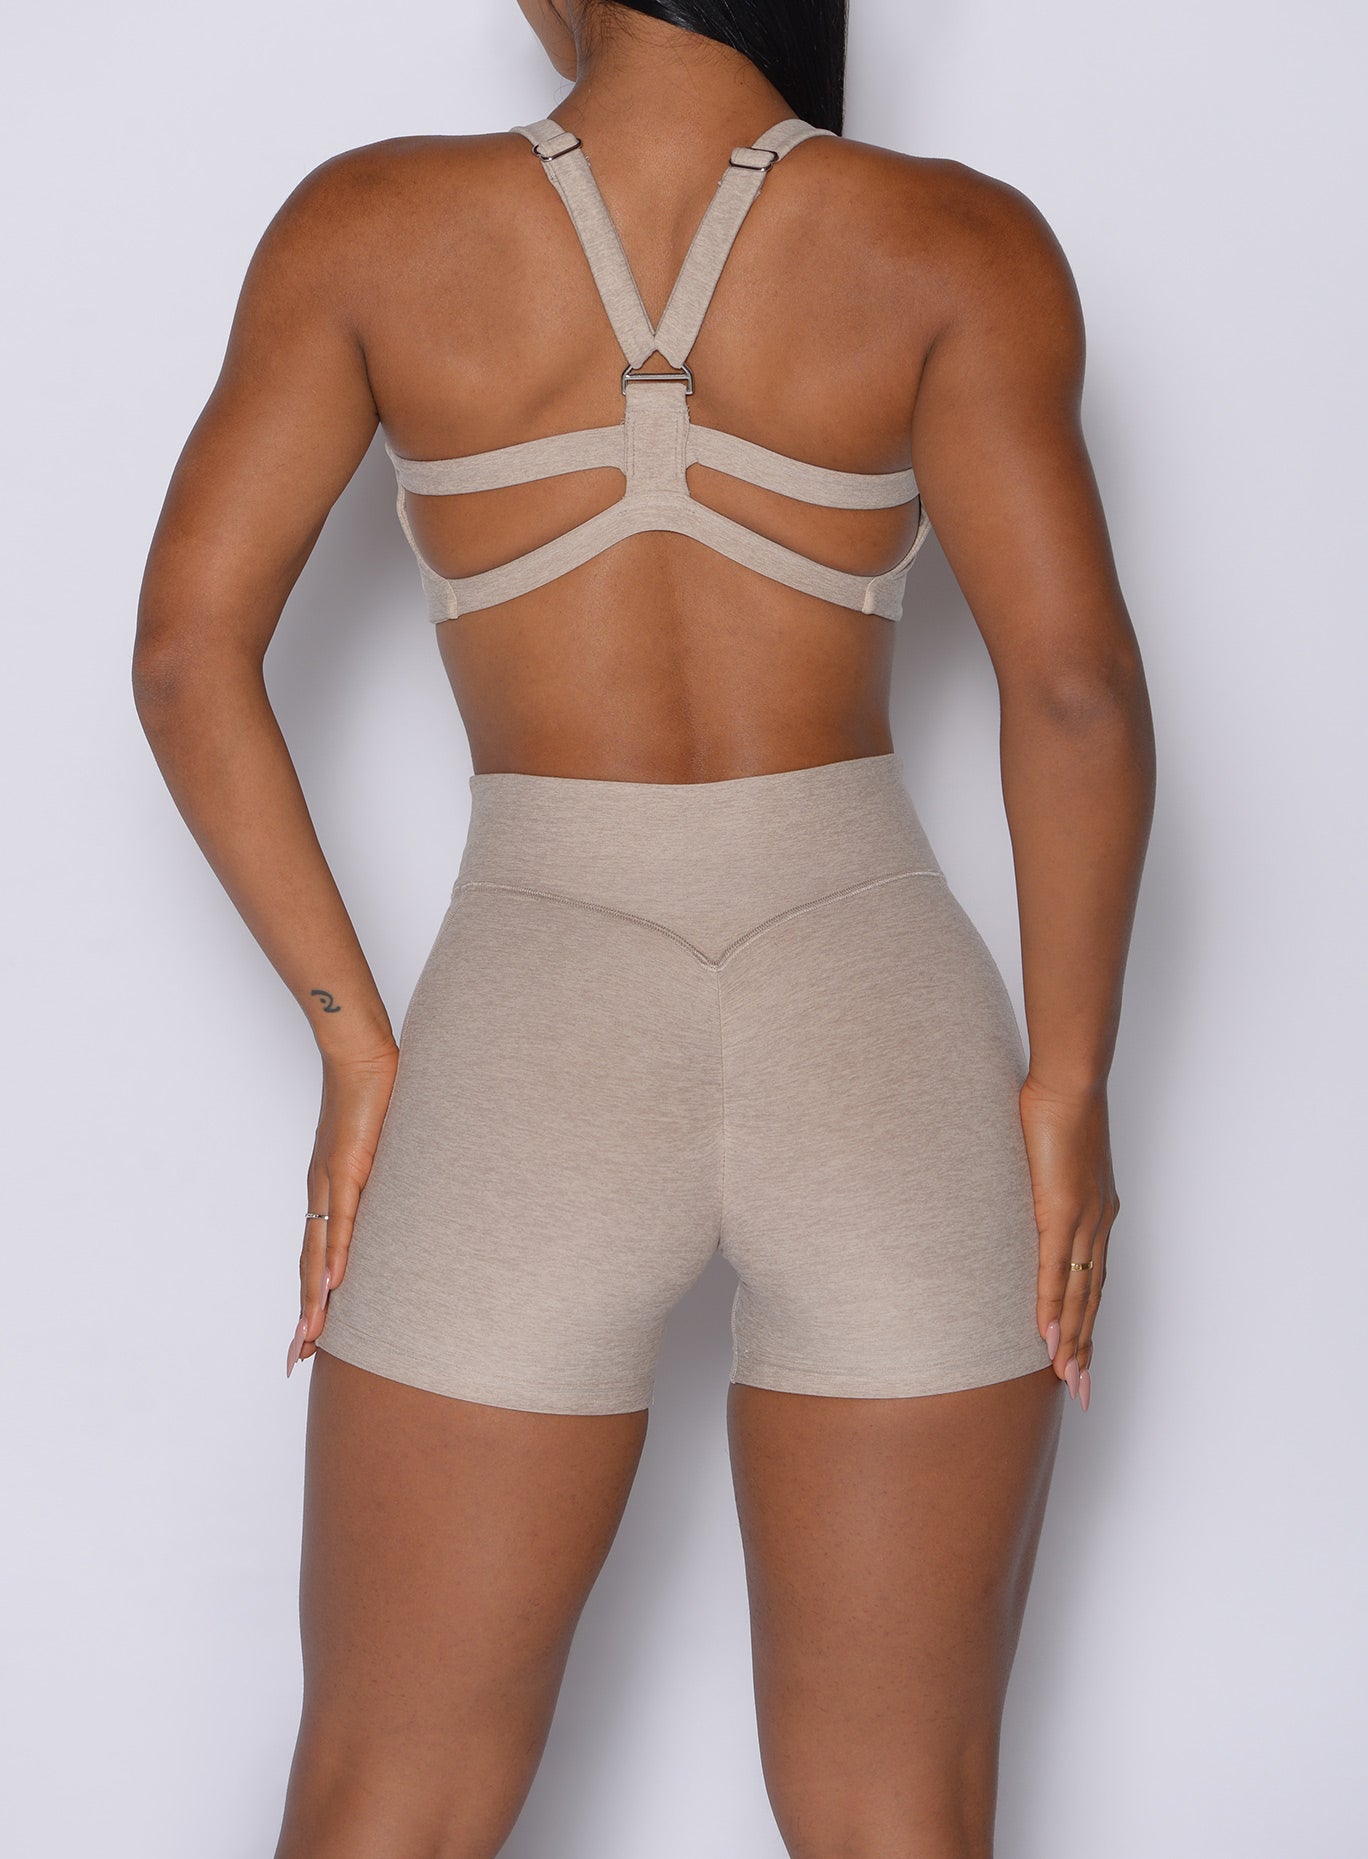 Zoomed in back side view of our Tiny Waist Shorts in Taupe color and a matching sports bra